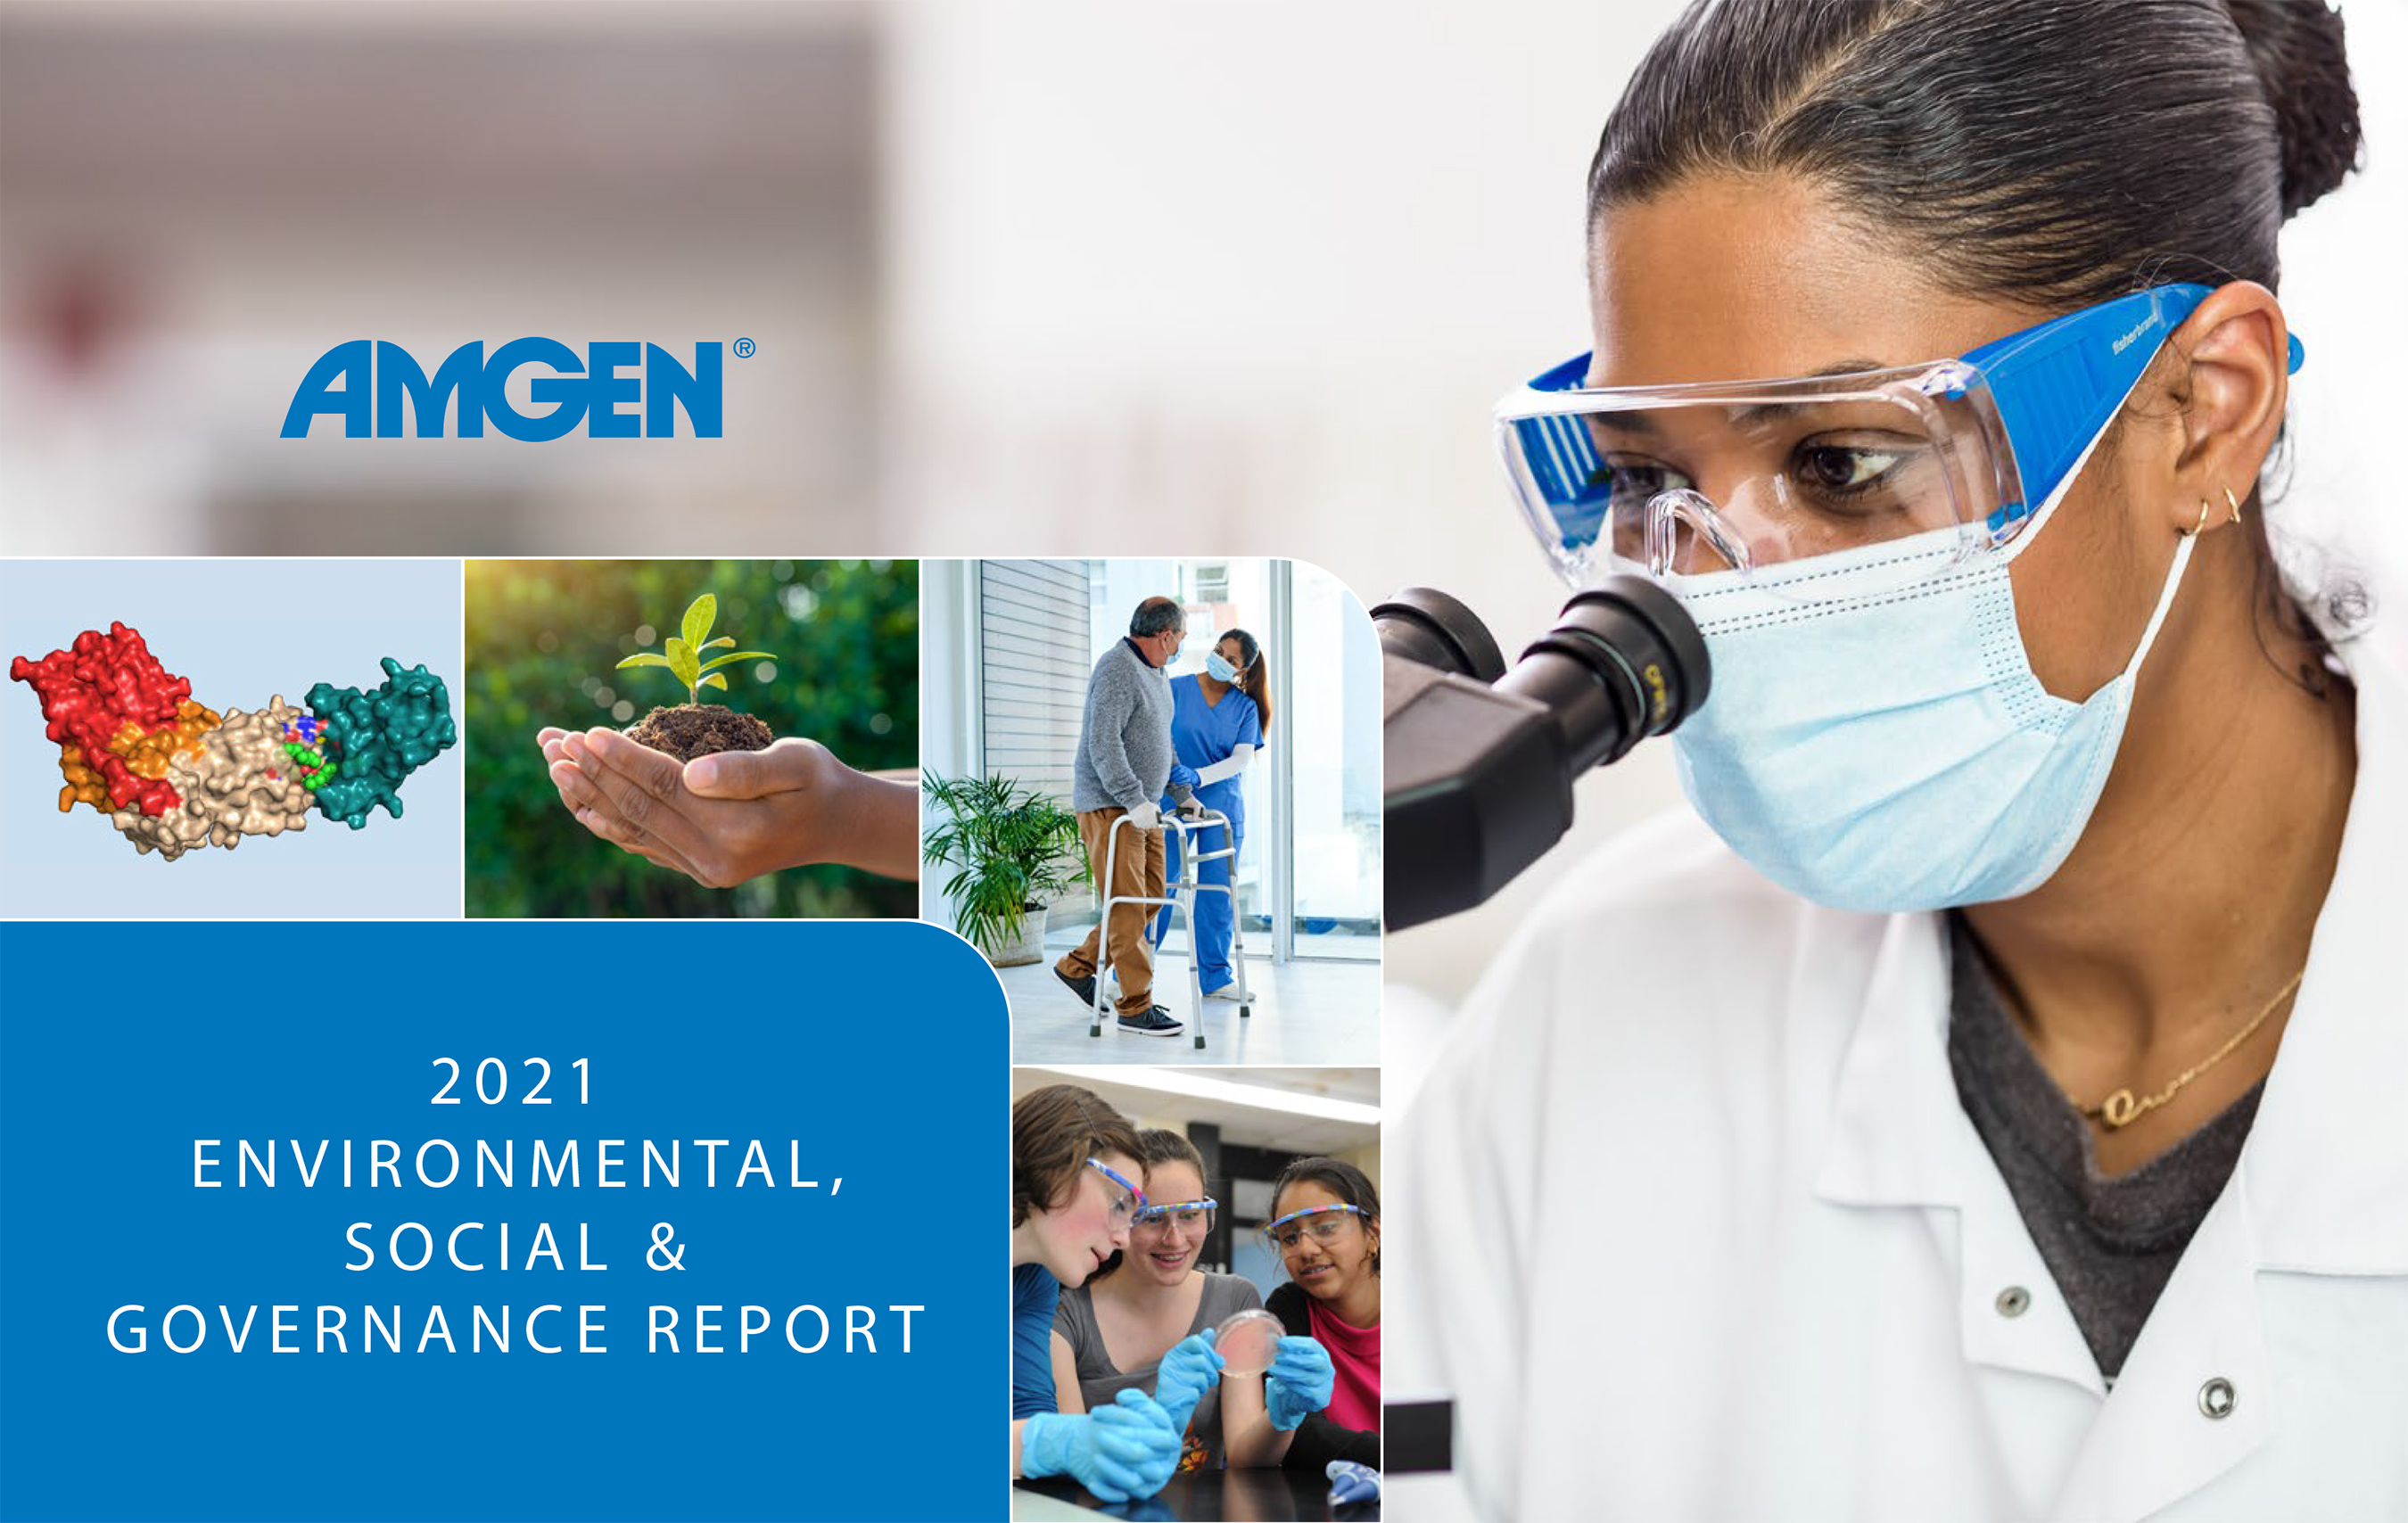 Amgen’s 2021 ESG report provides a comprehensive overview of the many ways we are doing our part to build a better, healthier world. The latest report tracks our progress across four categories: Healthy people, society, planet and Amgen.